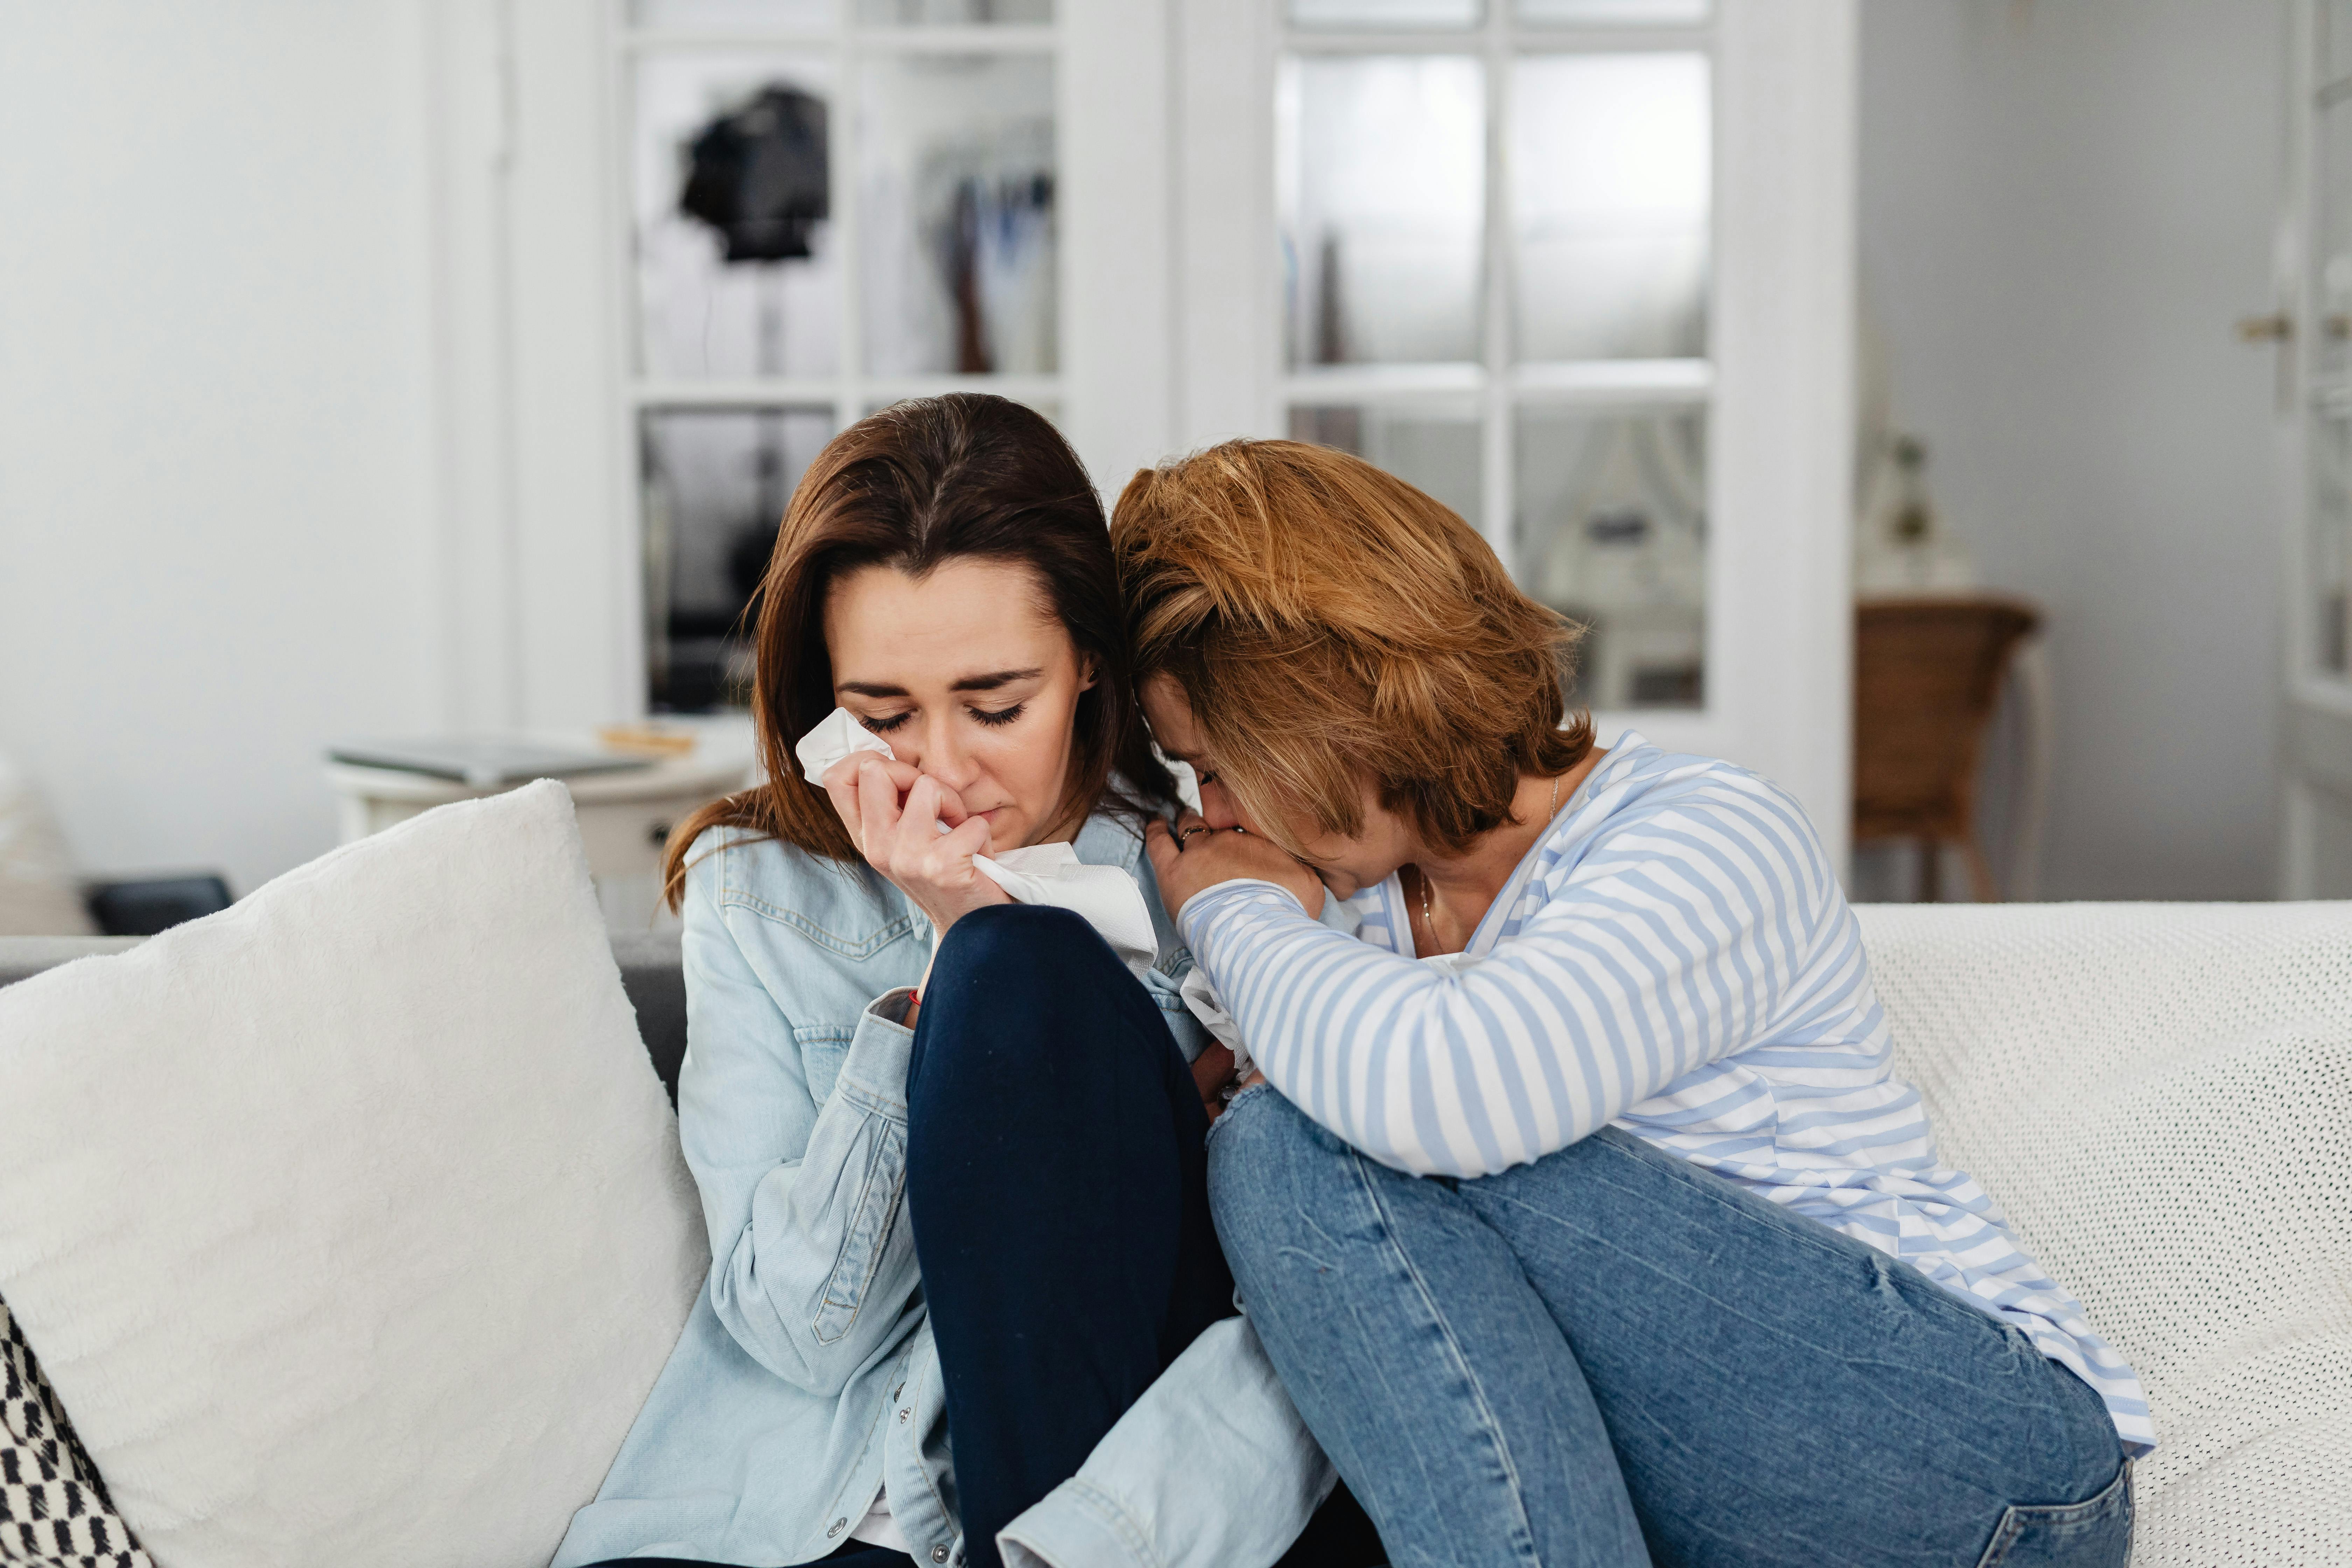 An emotional woman being comforted by a friend | Source: Pexels